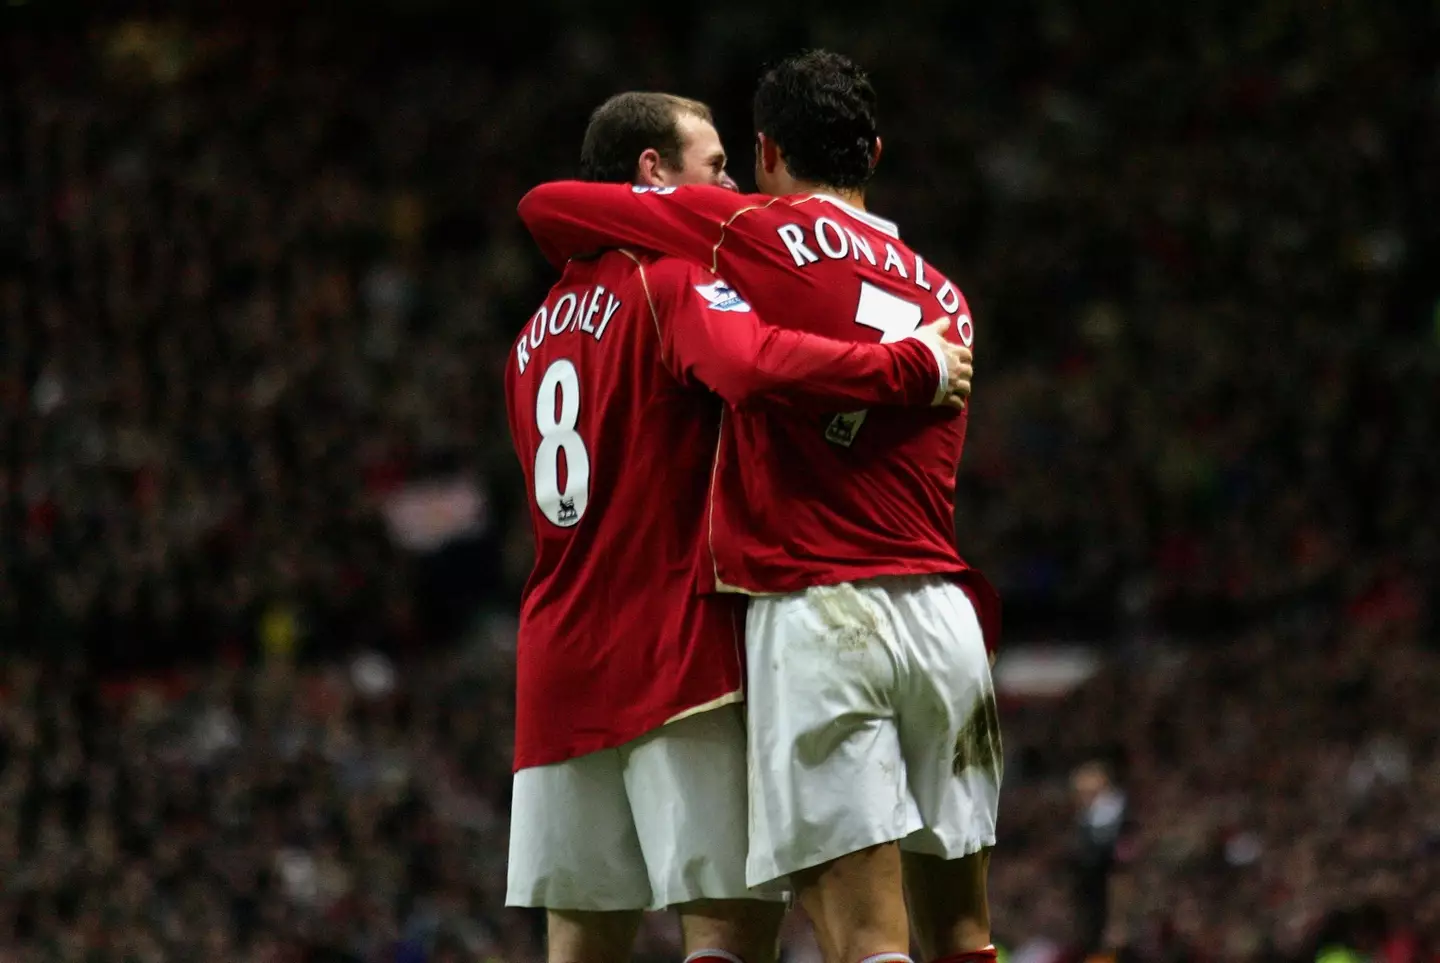 Rooney and Ronaldo in 2007. (Image